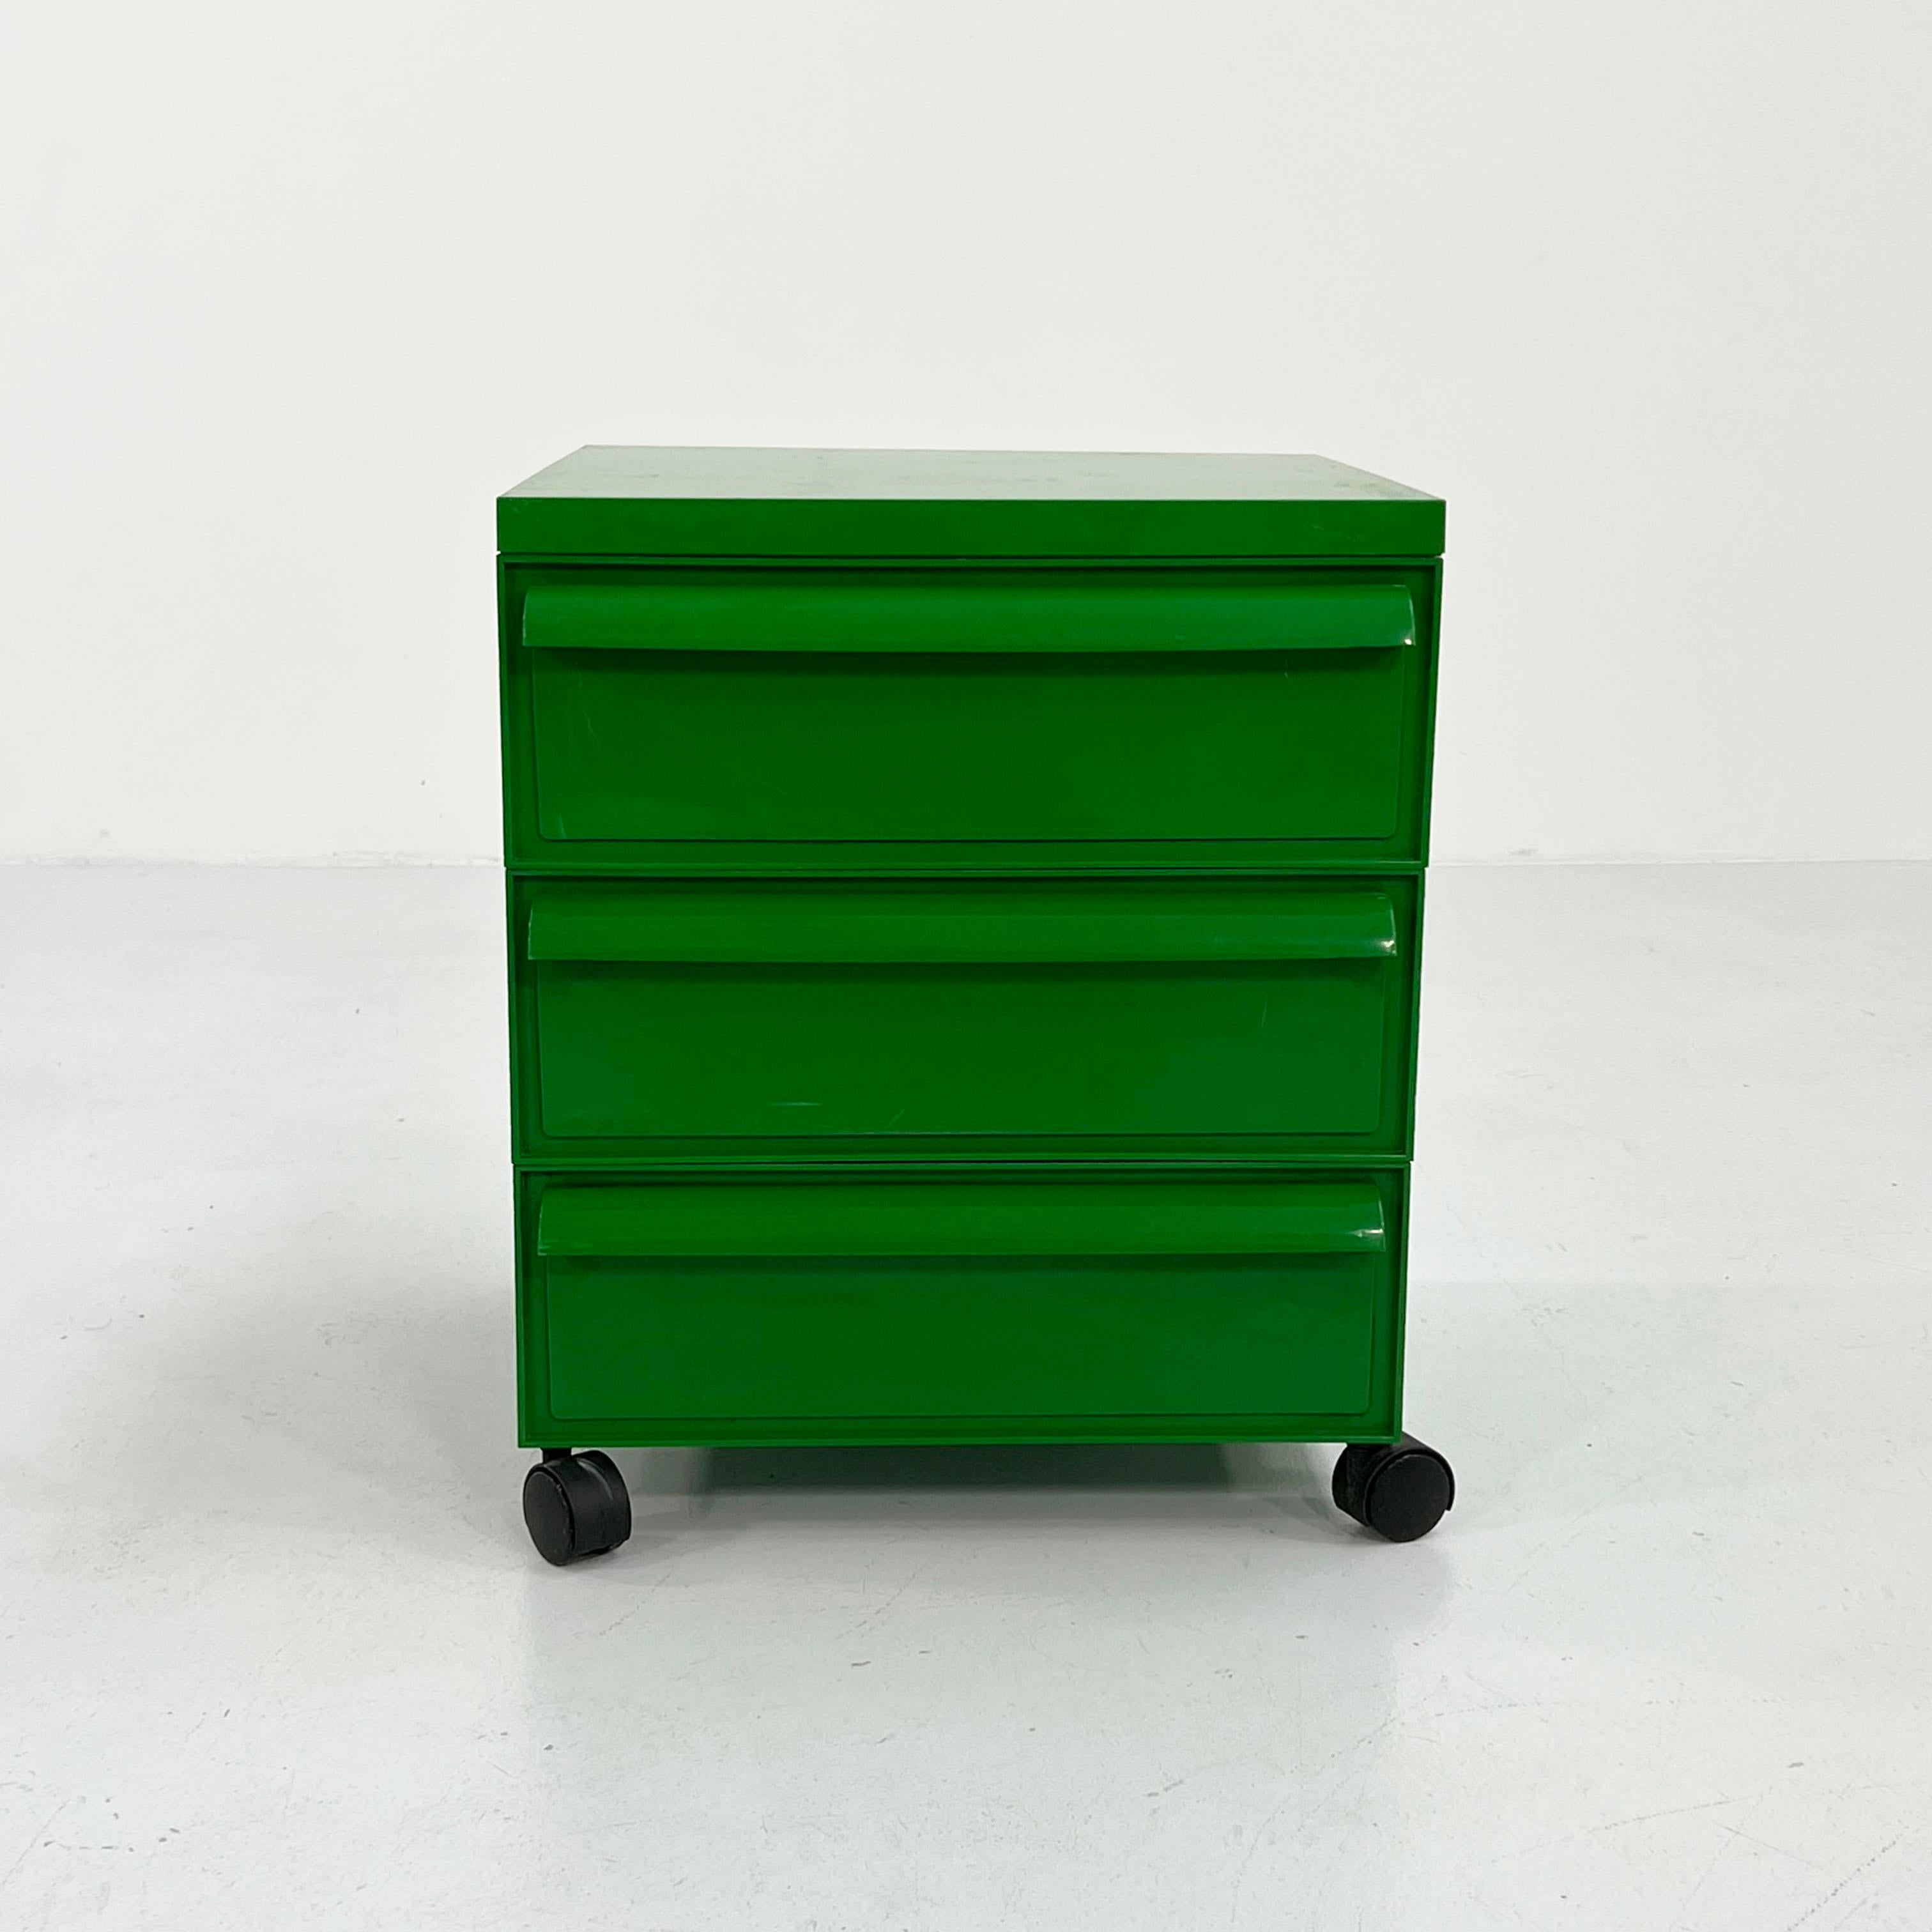 Designer - Simon Fussell
Producer - Kartell
Model - Model 4602
Design Period - Seventies
Measurements - Width 42 cm x Depth 42 cm x Height 50 cm
Materials - Plastic
Color - Green
Condition - Good 
Comments - Light wear consistent with age